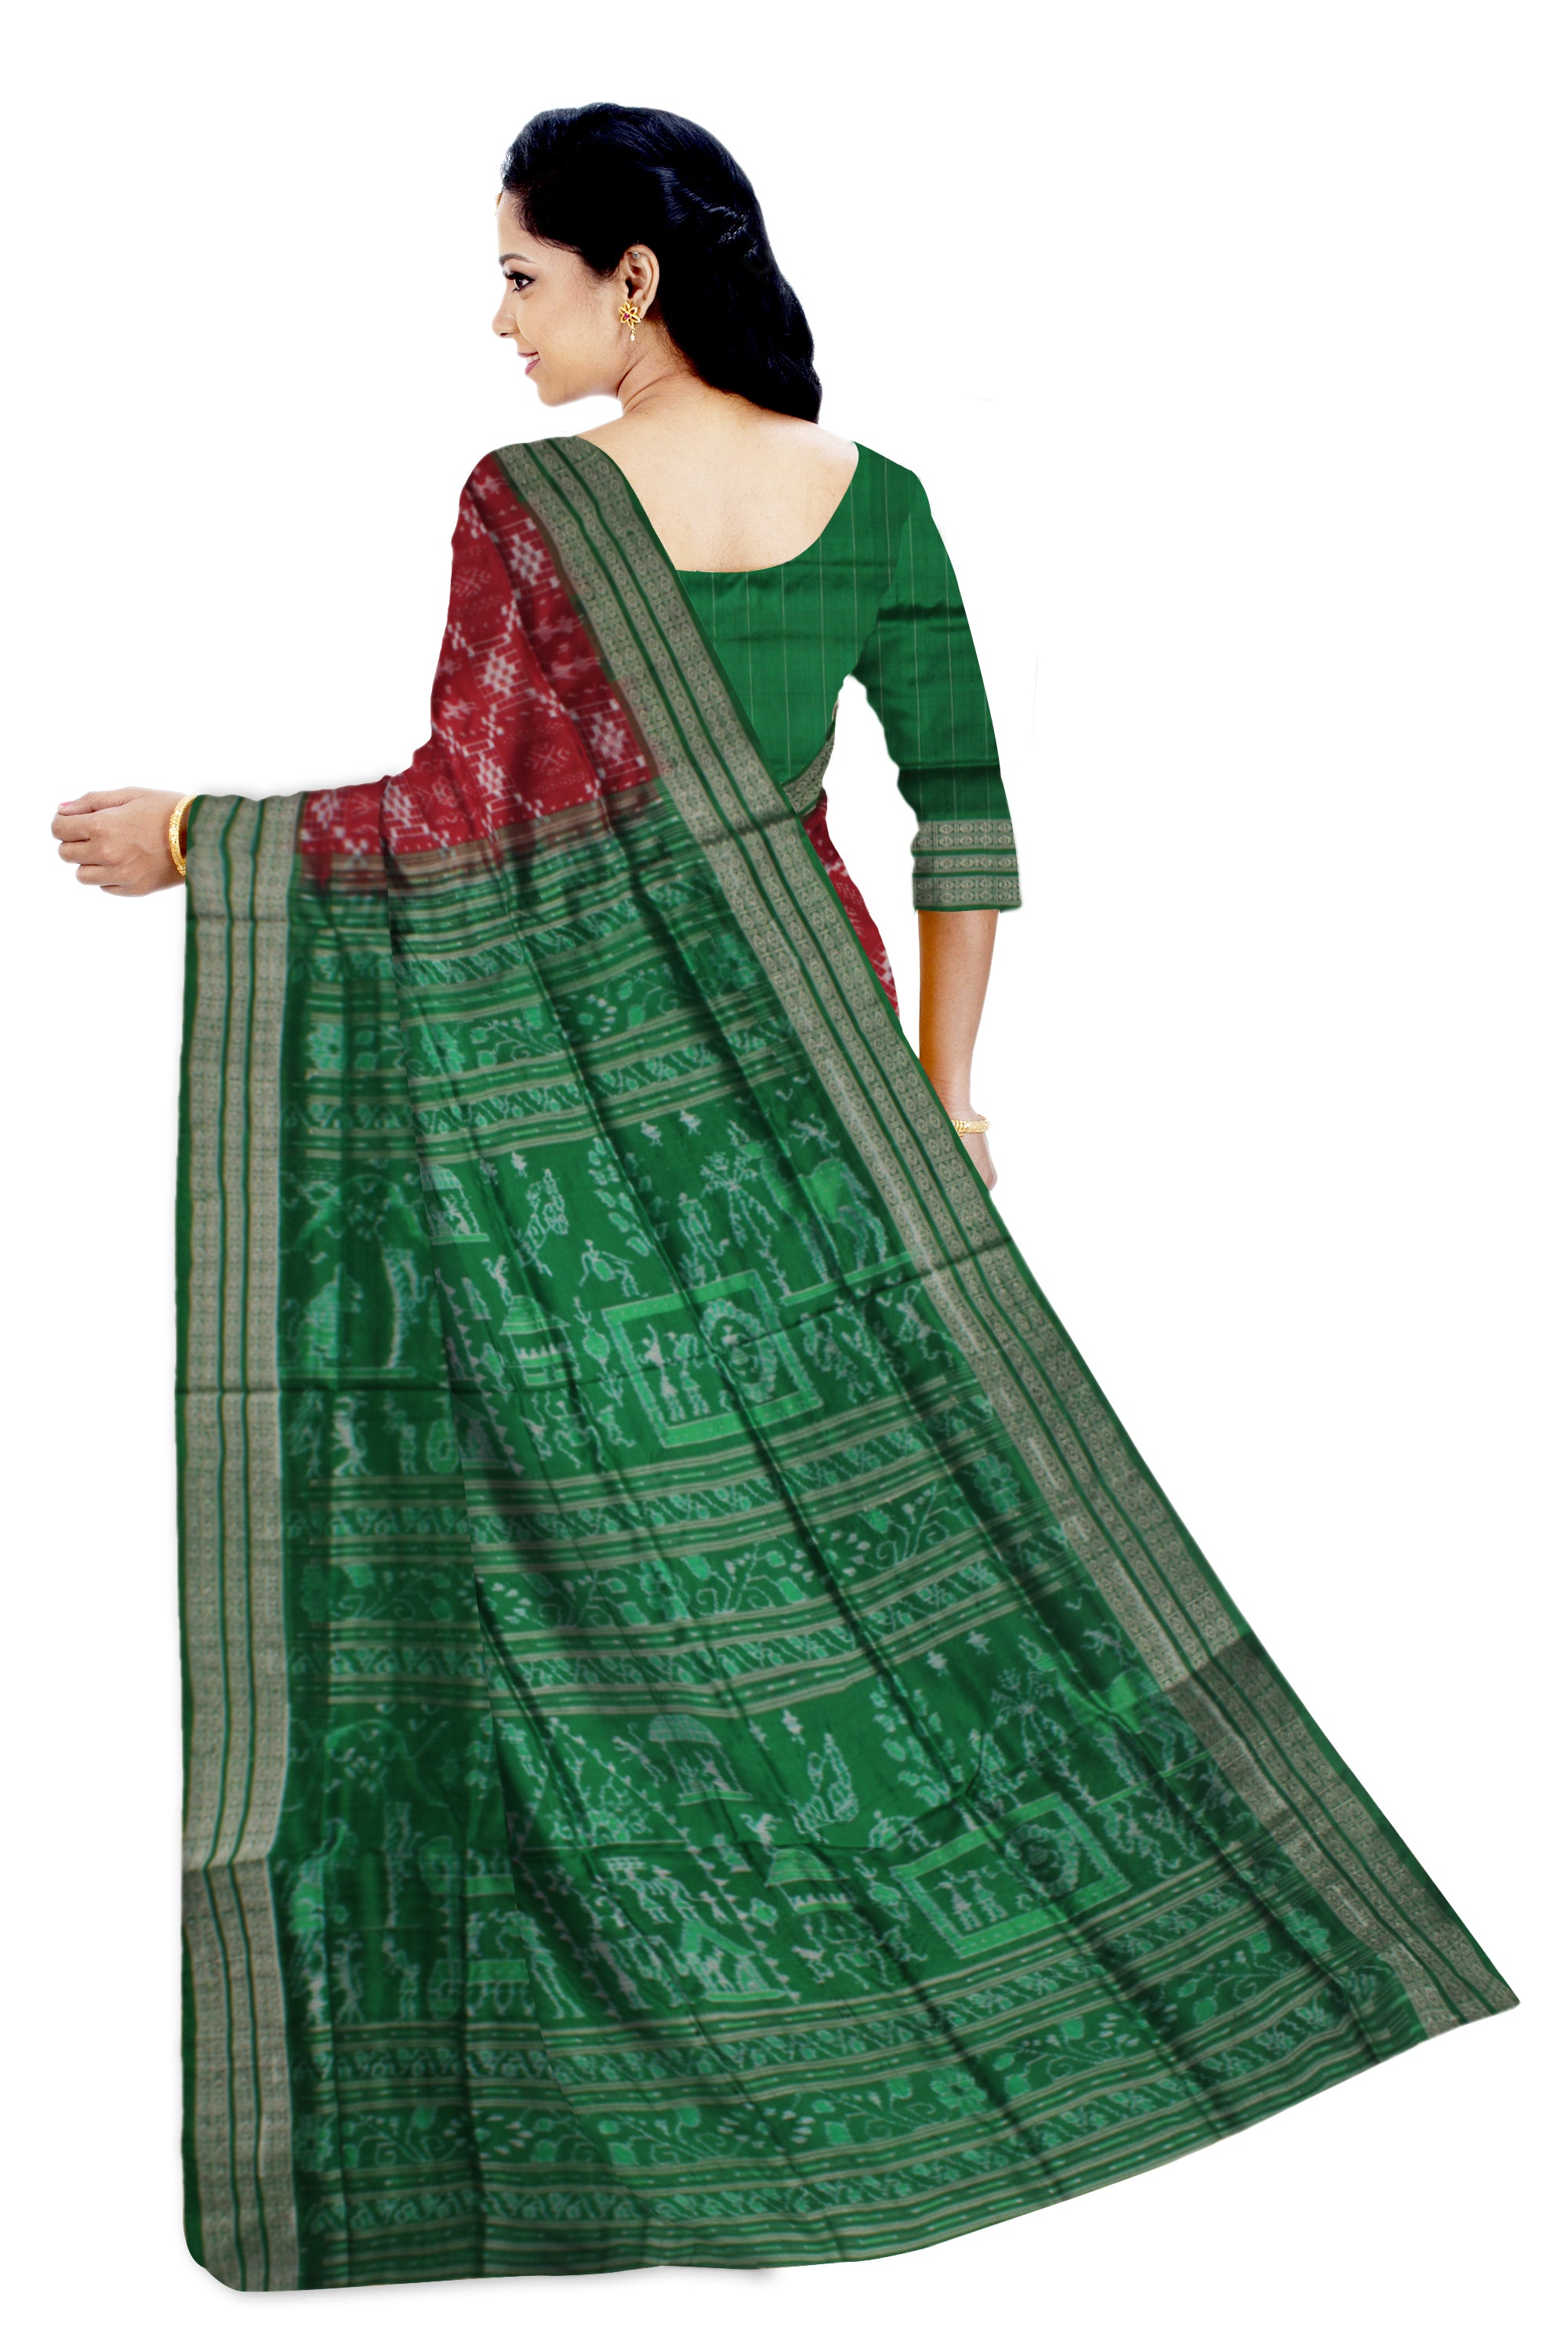 TERRACOTTA WITH PASAPALI PATTERN PURE SILK SAREE IS MAROON AND GREEN COLOR BASE,ATTACHED WITH MATCHING BLOUSE PIECE. - Koshali Arts & Crafts Enterprise